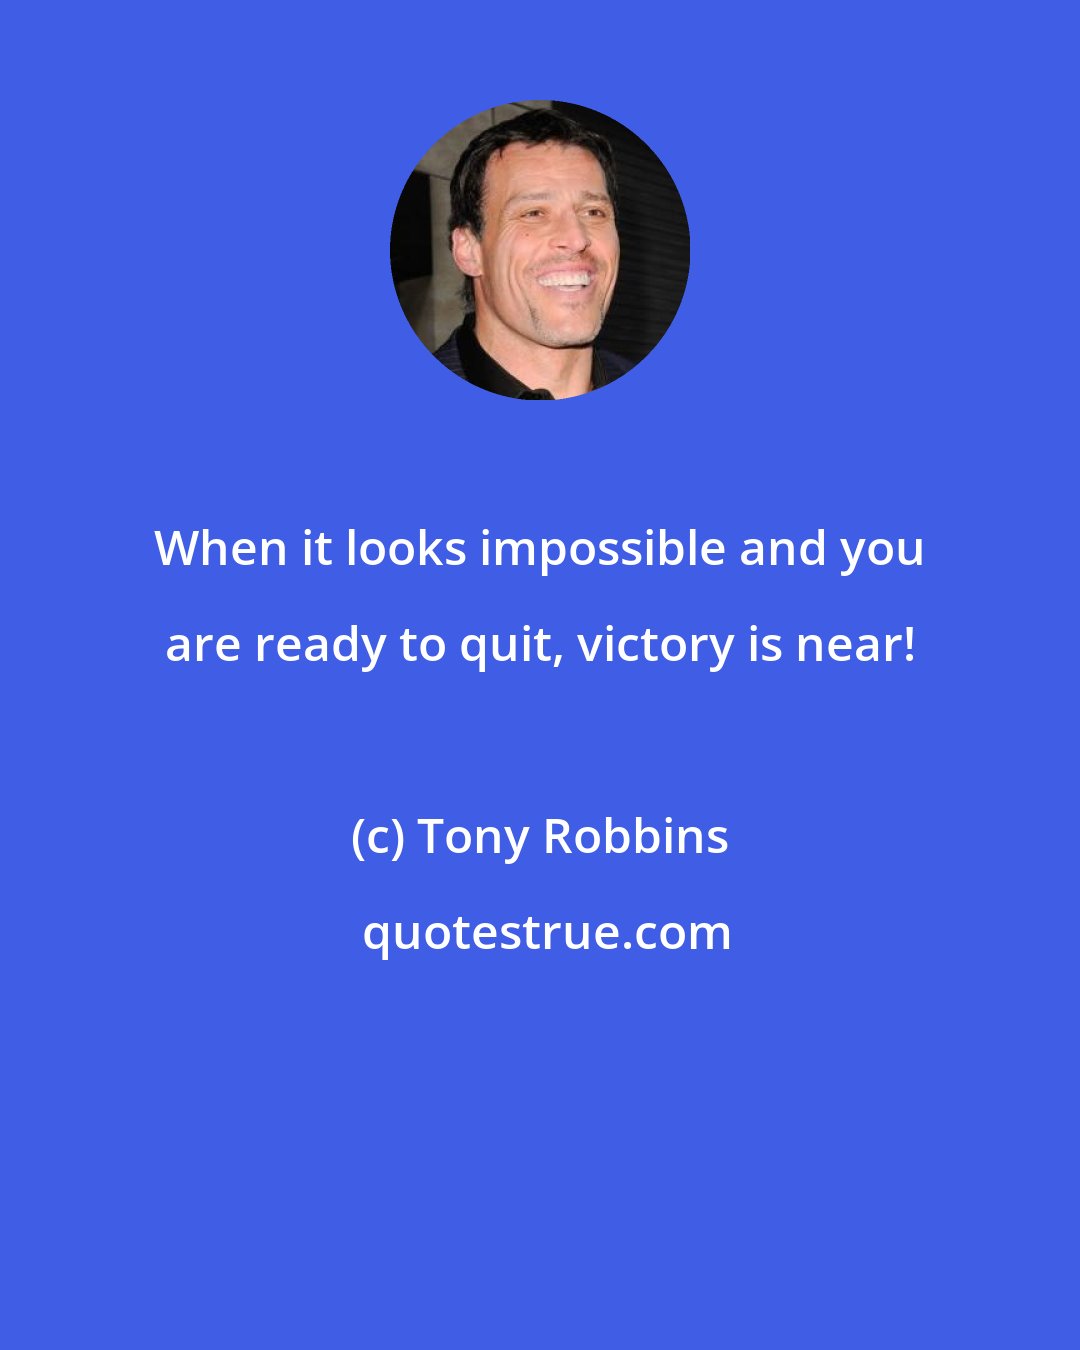 Tony Robbins: When it looks impossible and you are ready to quit, victory is near!